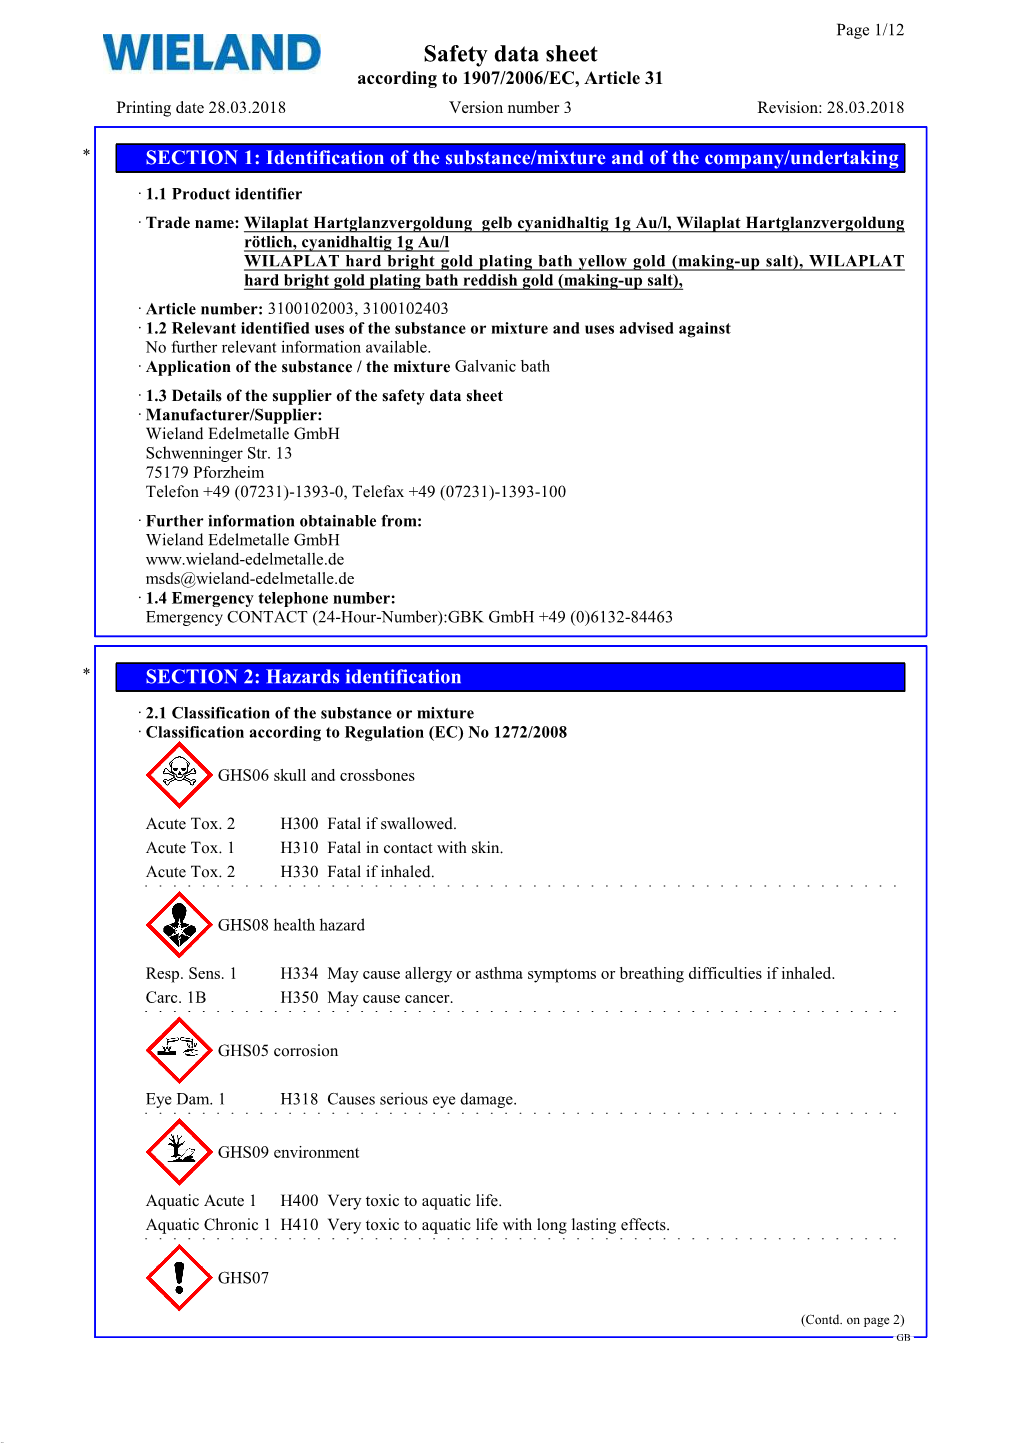 Safety Data Sheet According to 1907/2006/EC, Article 31 Printing Date 28.03.2018 Version Number 3 Revision: 28.03.2018